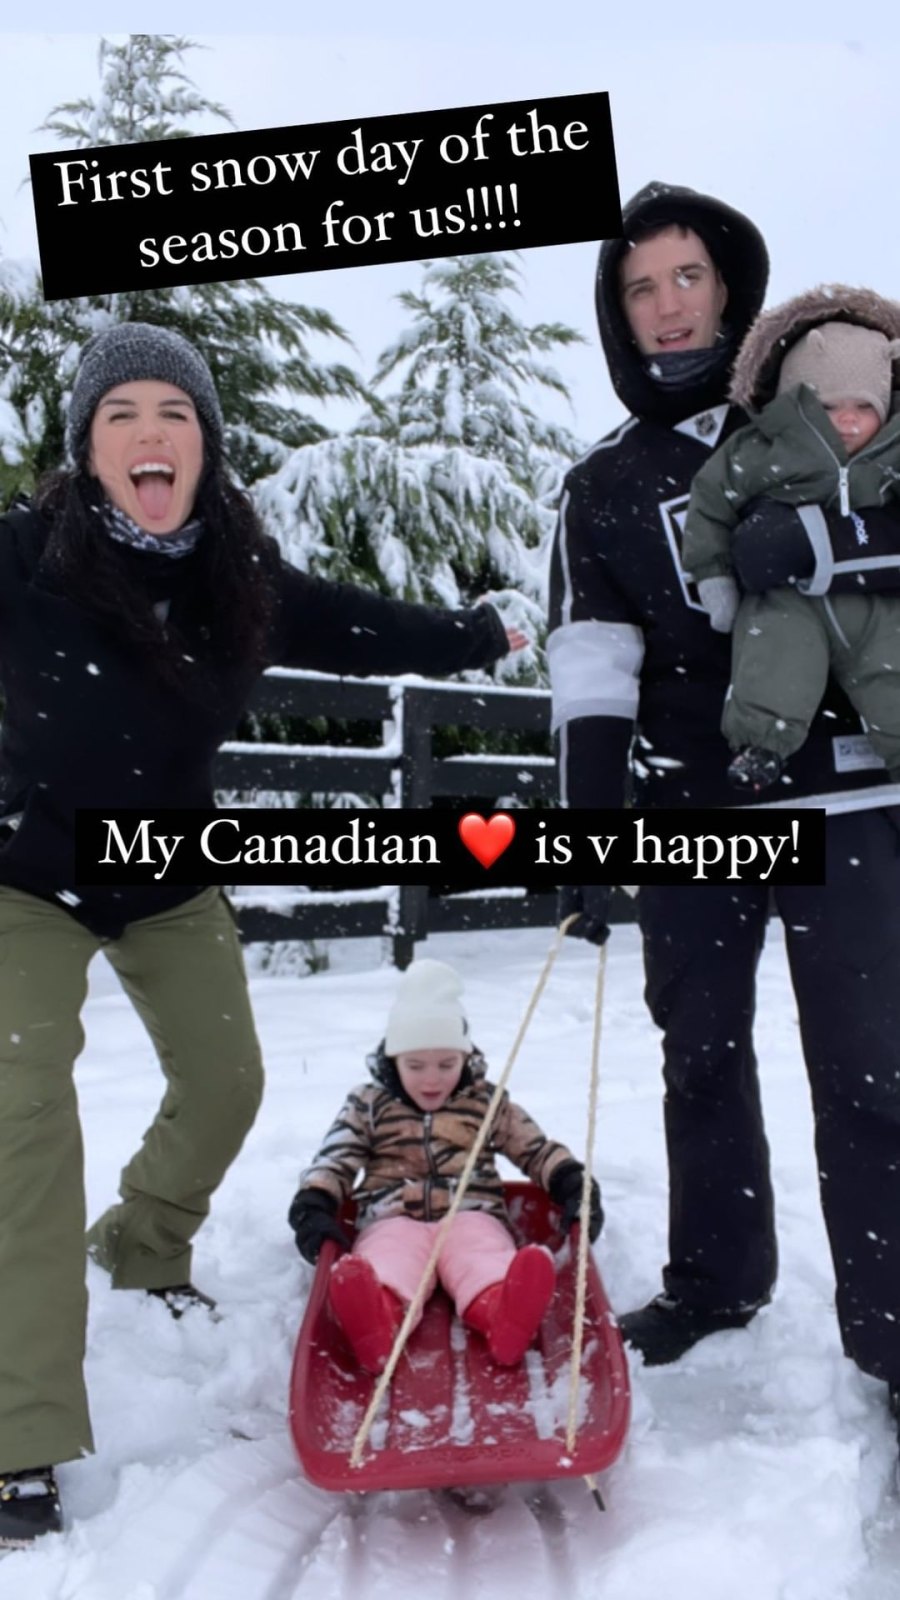 Shenae Grimes-Beech, More Celeb Parents Playing in the Snow With Their Kids